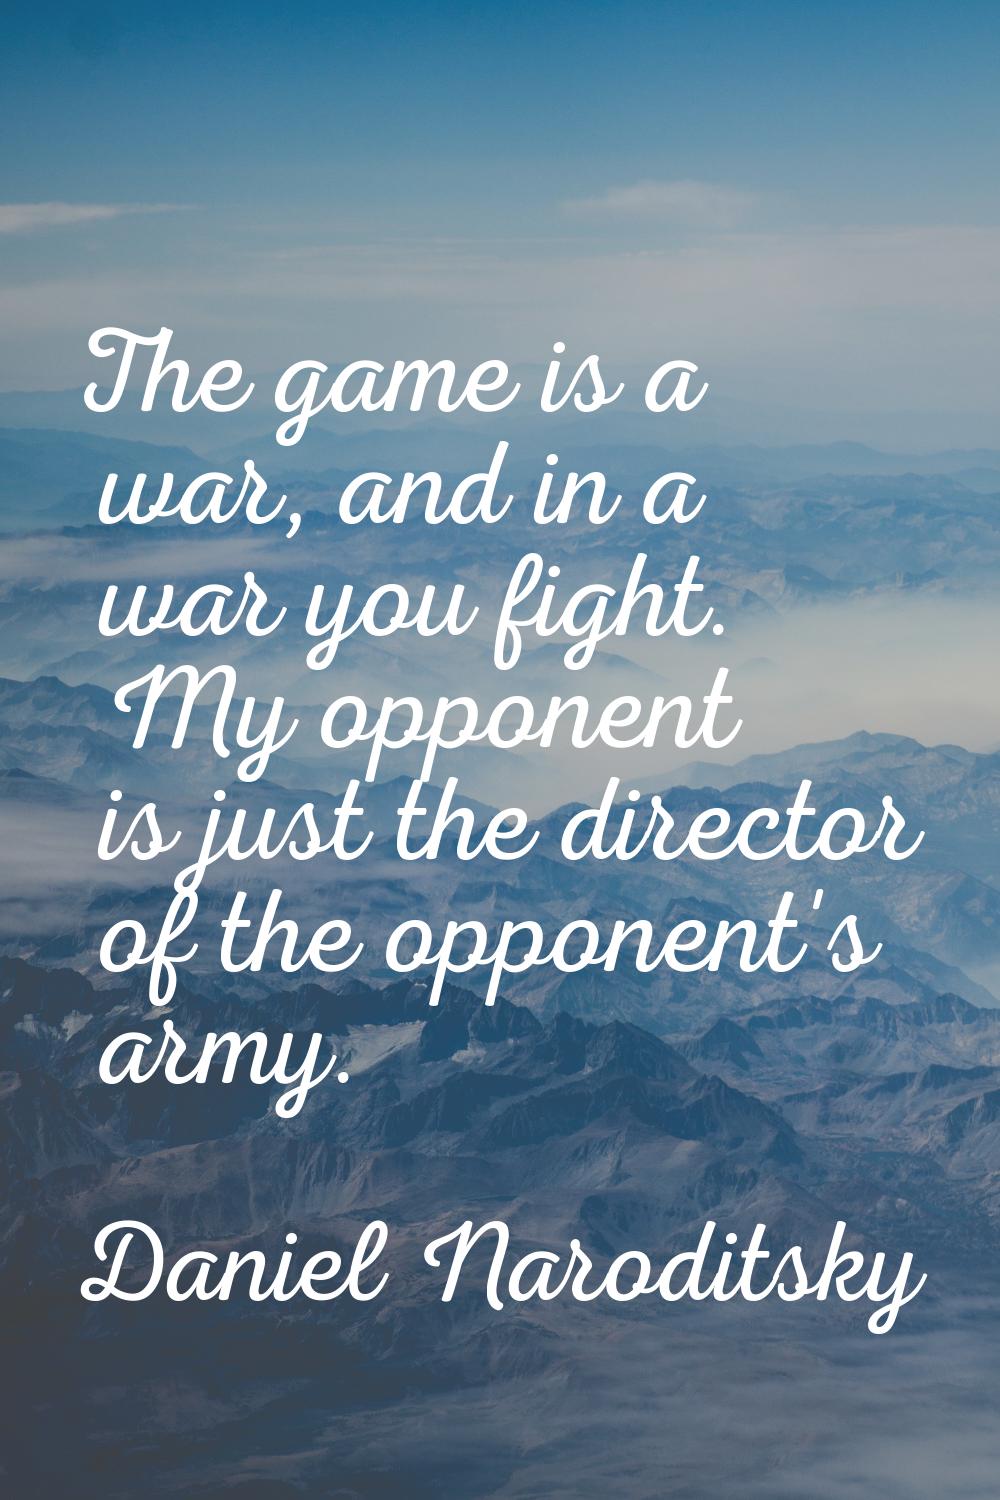 The game is a war, and in a war you fight. My opponent is just the director of the opponent's army.